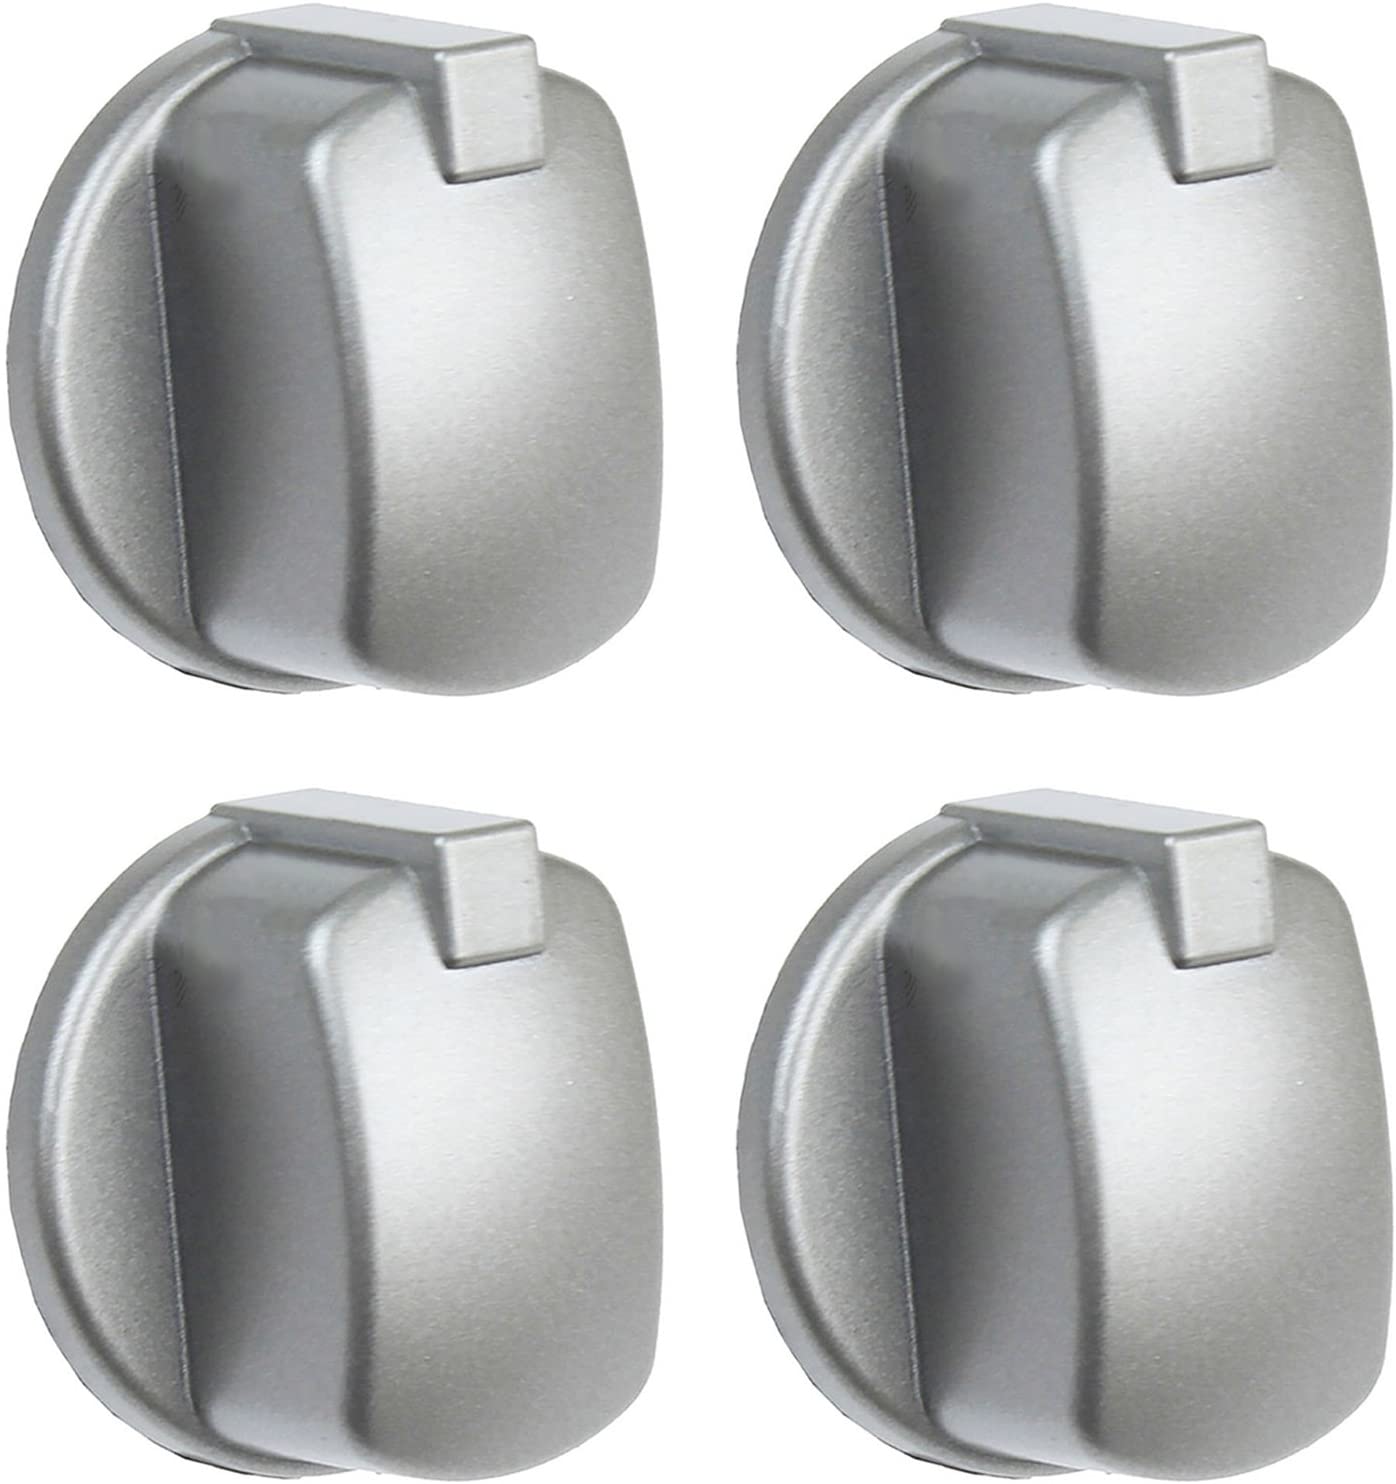 Control Knob Switch Button for INDESIT FIM Cooker Oven Pack of 4 (Silver/INOX)